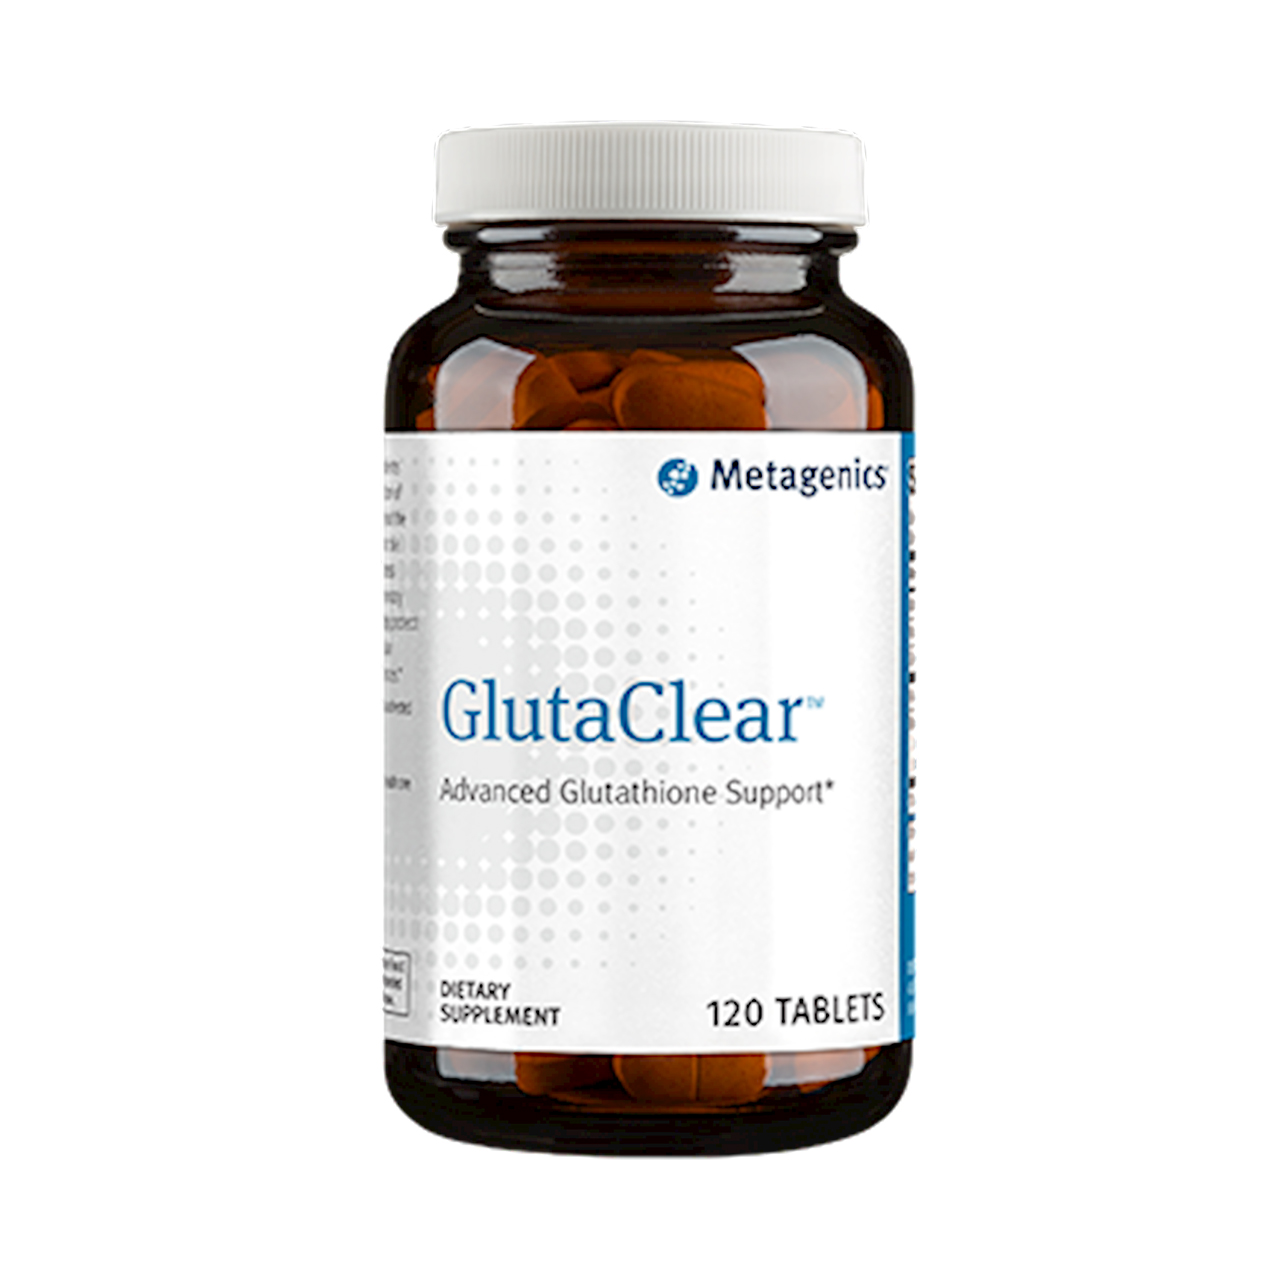 Metagenics GlutaClear - 120 Tabs. Questions & Answers